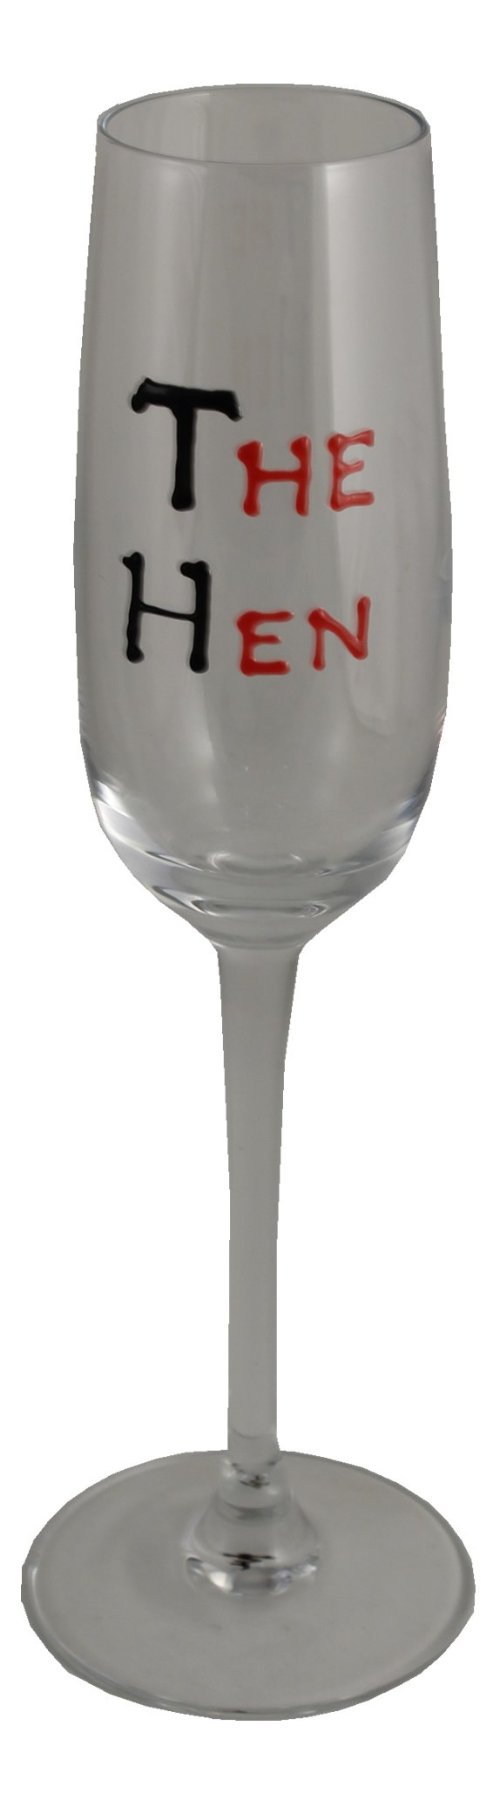 The Hen Champagne Glass (Blk/Red)